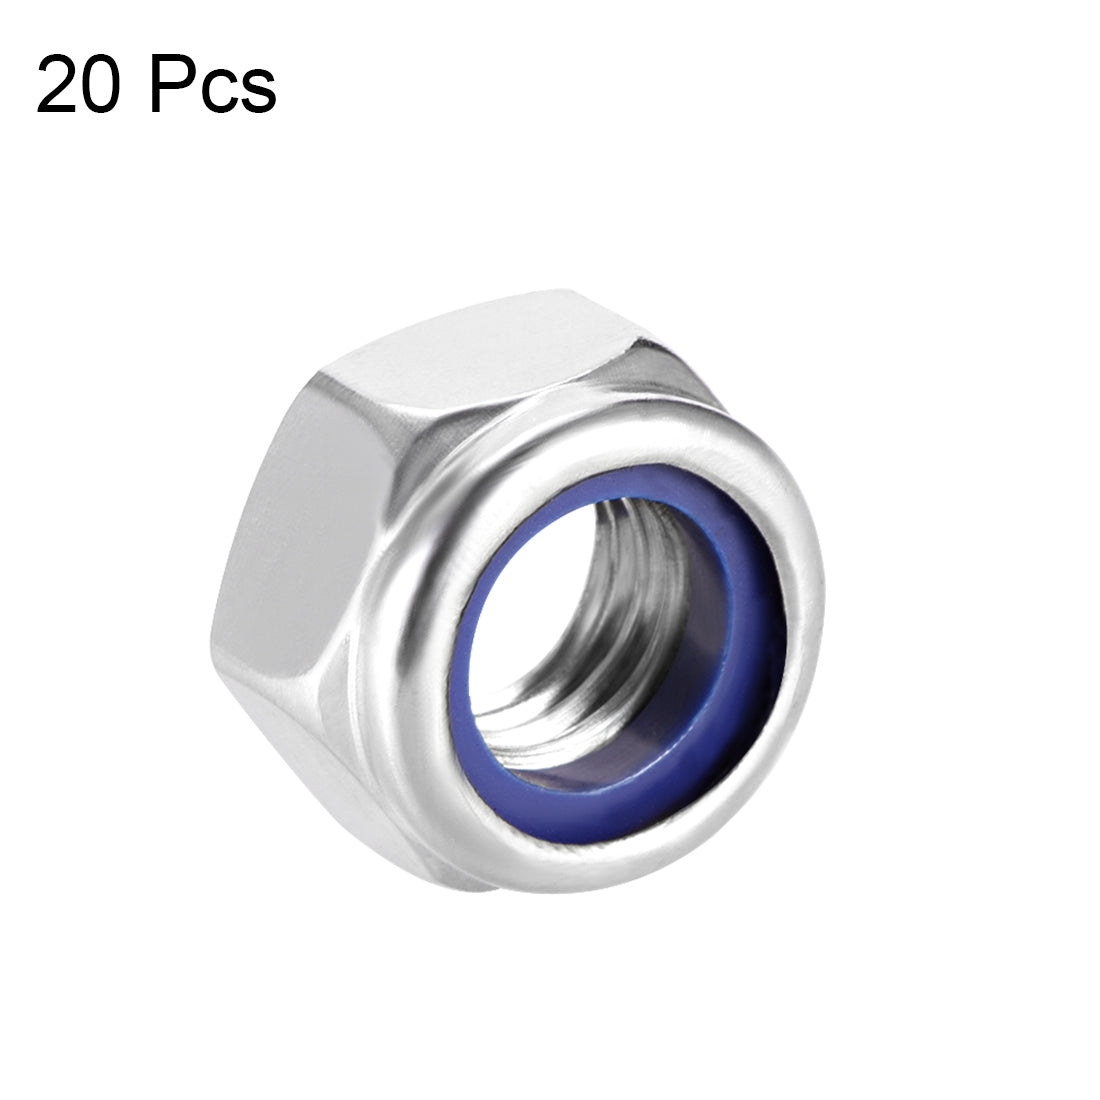 uxcell Uxcell M12x1.75mm Hex Lock Nut Stainless Steel Nylon Insert Self-Lock Nut, 20Pcs Silver